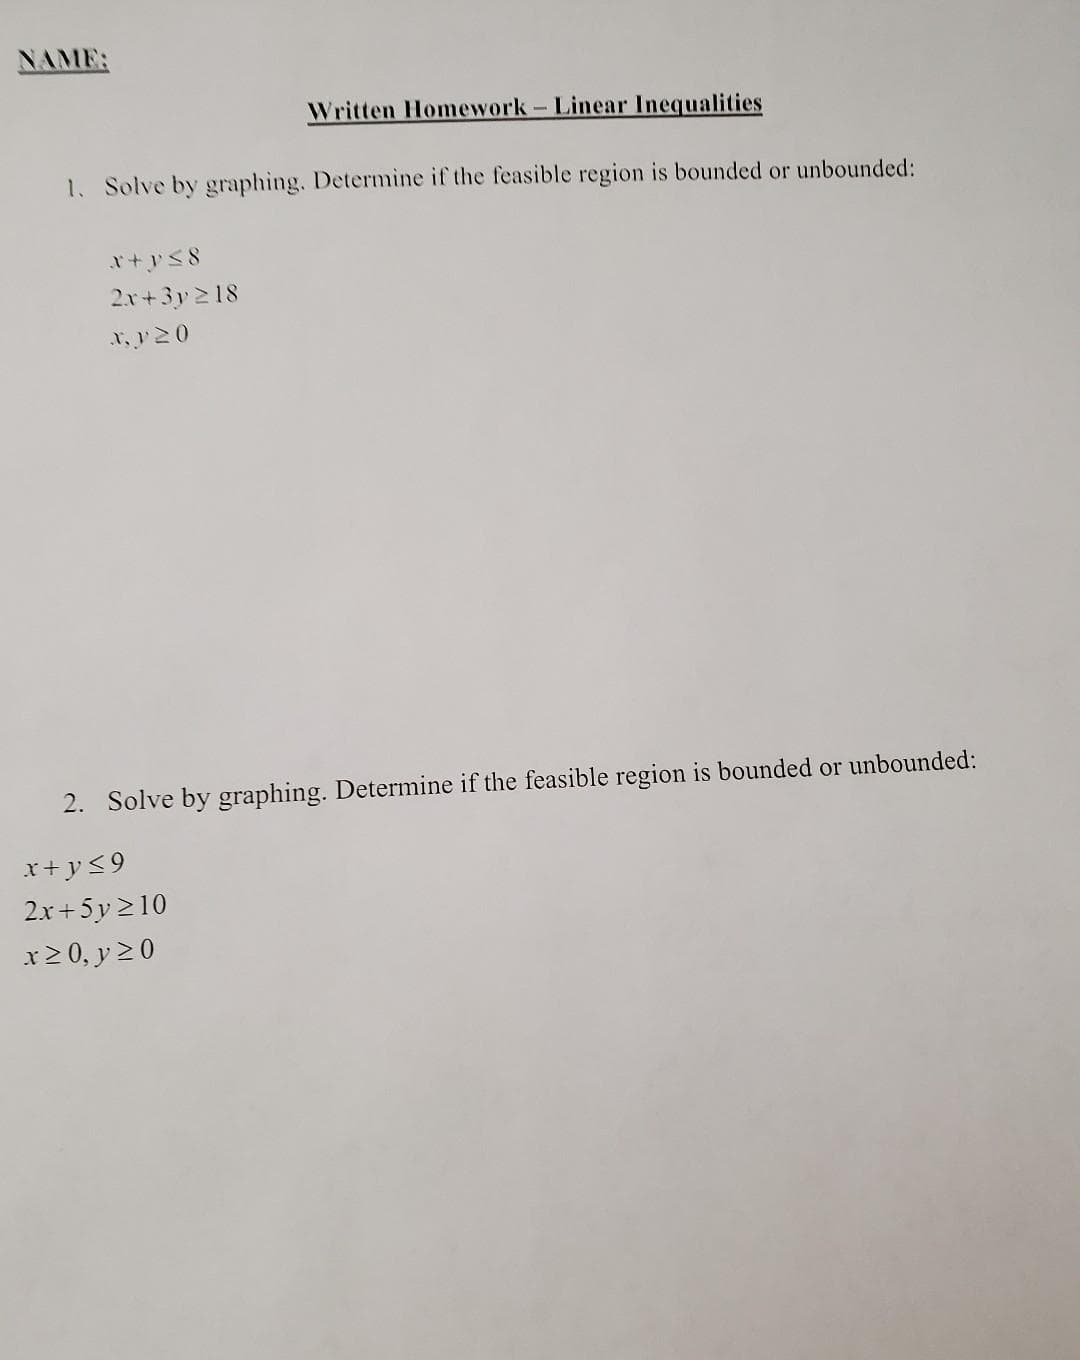 NAME:
Written Homework- Linear Inequalities
1. Solve by graphing. Determine if the feasible region is bounded or unbounded:
2.r+3y 2 18
x, y20
2. Solve by graphing. Determine if the feasible region is bounded or unbounded:
x+ y<9
2.x+5y 210
x2 0, y 20
